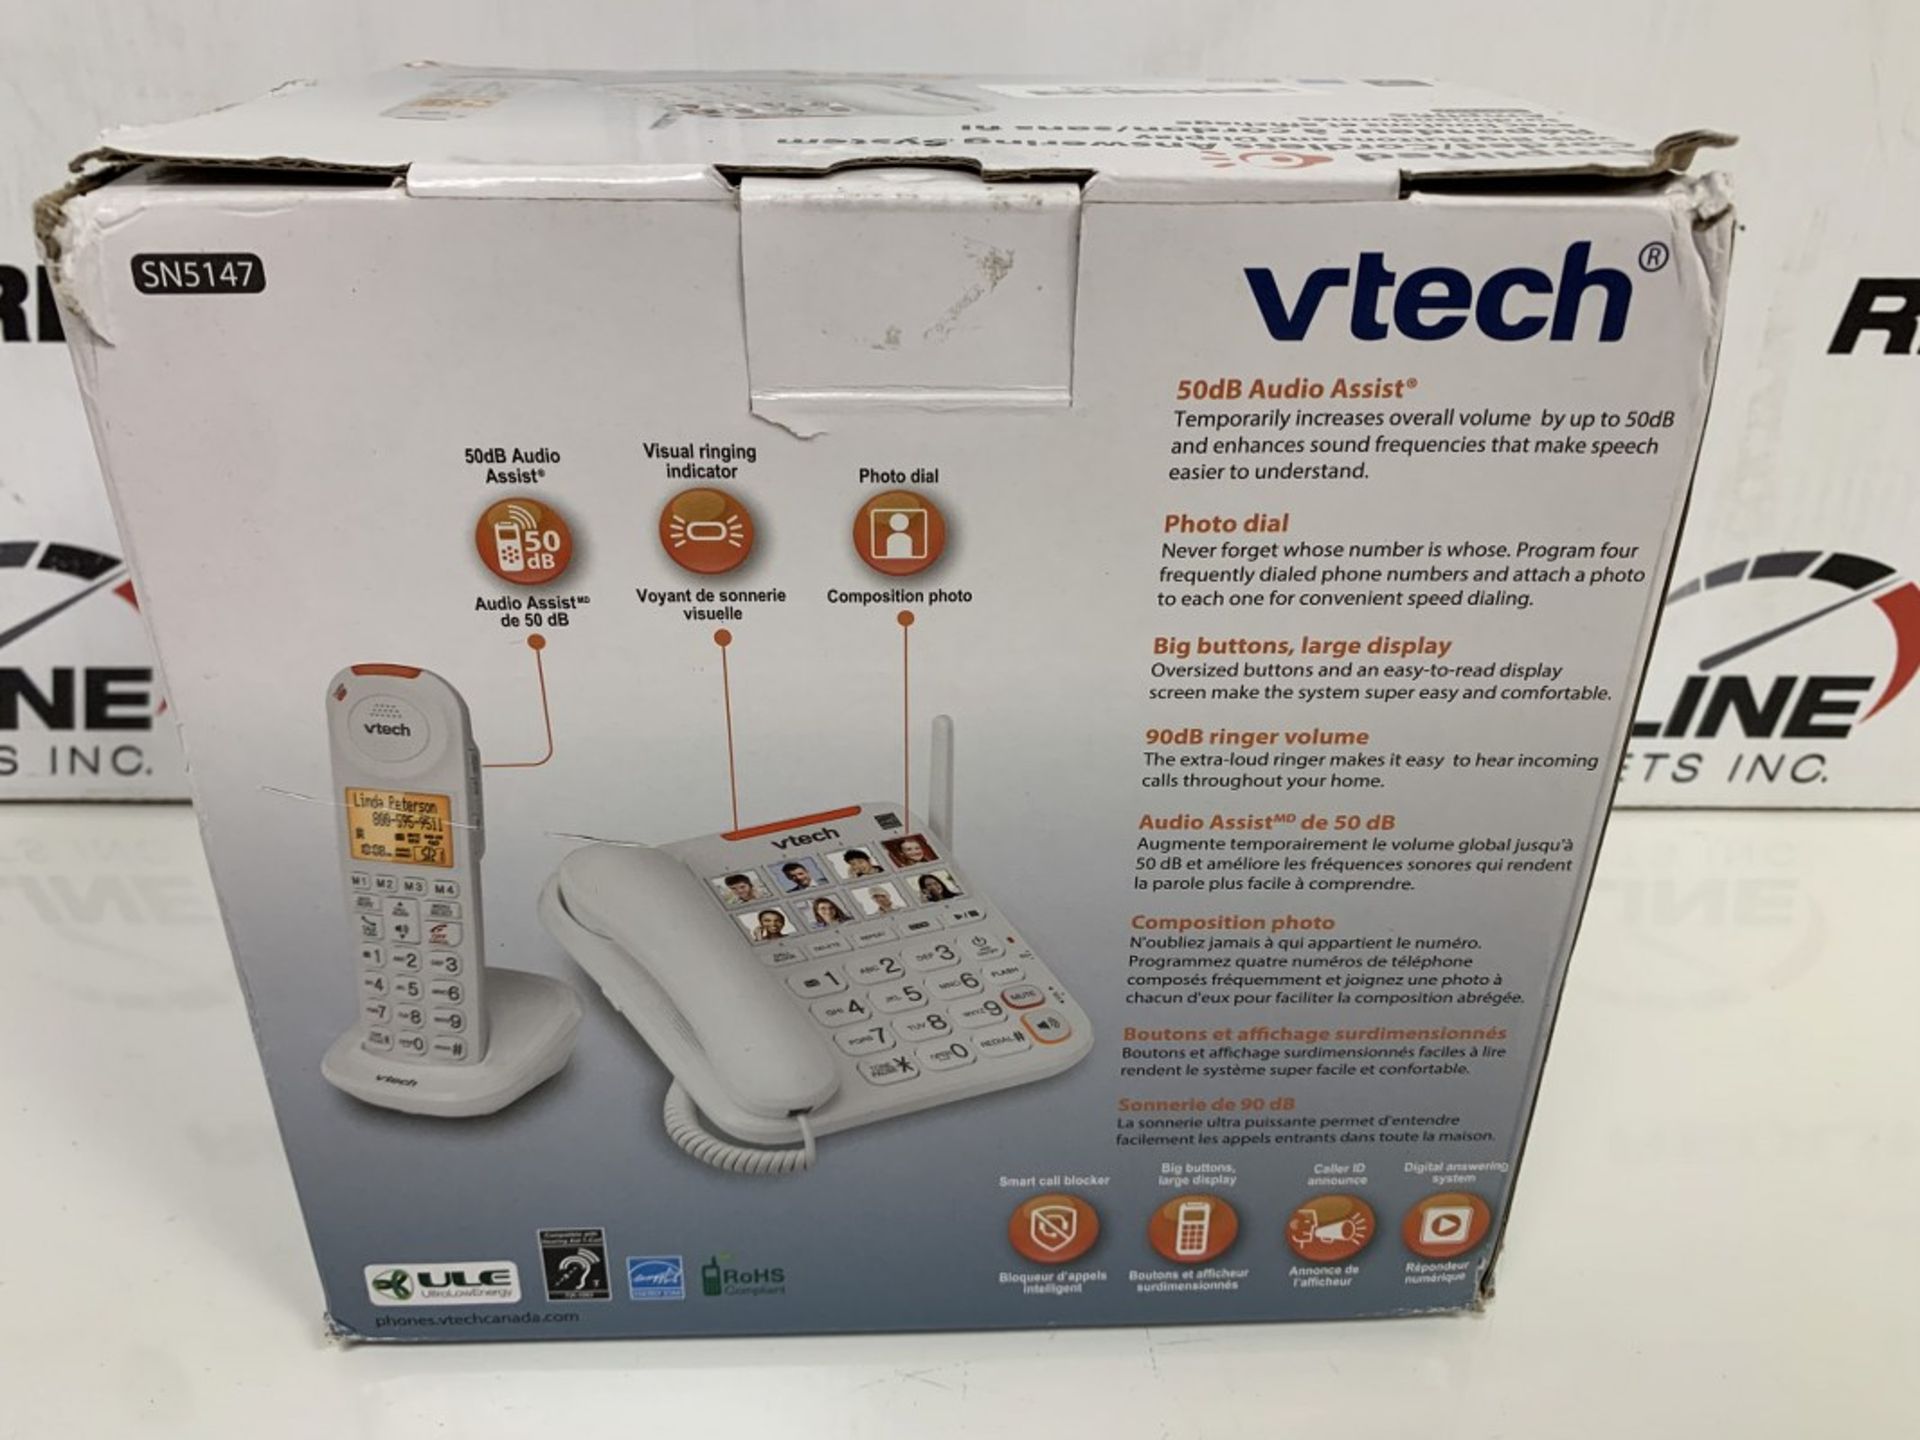 Vtech - Corded Cordless Answering System - Image 2 of 2